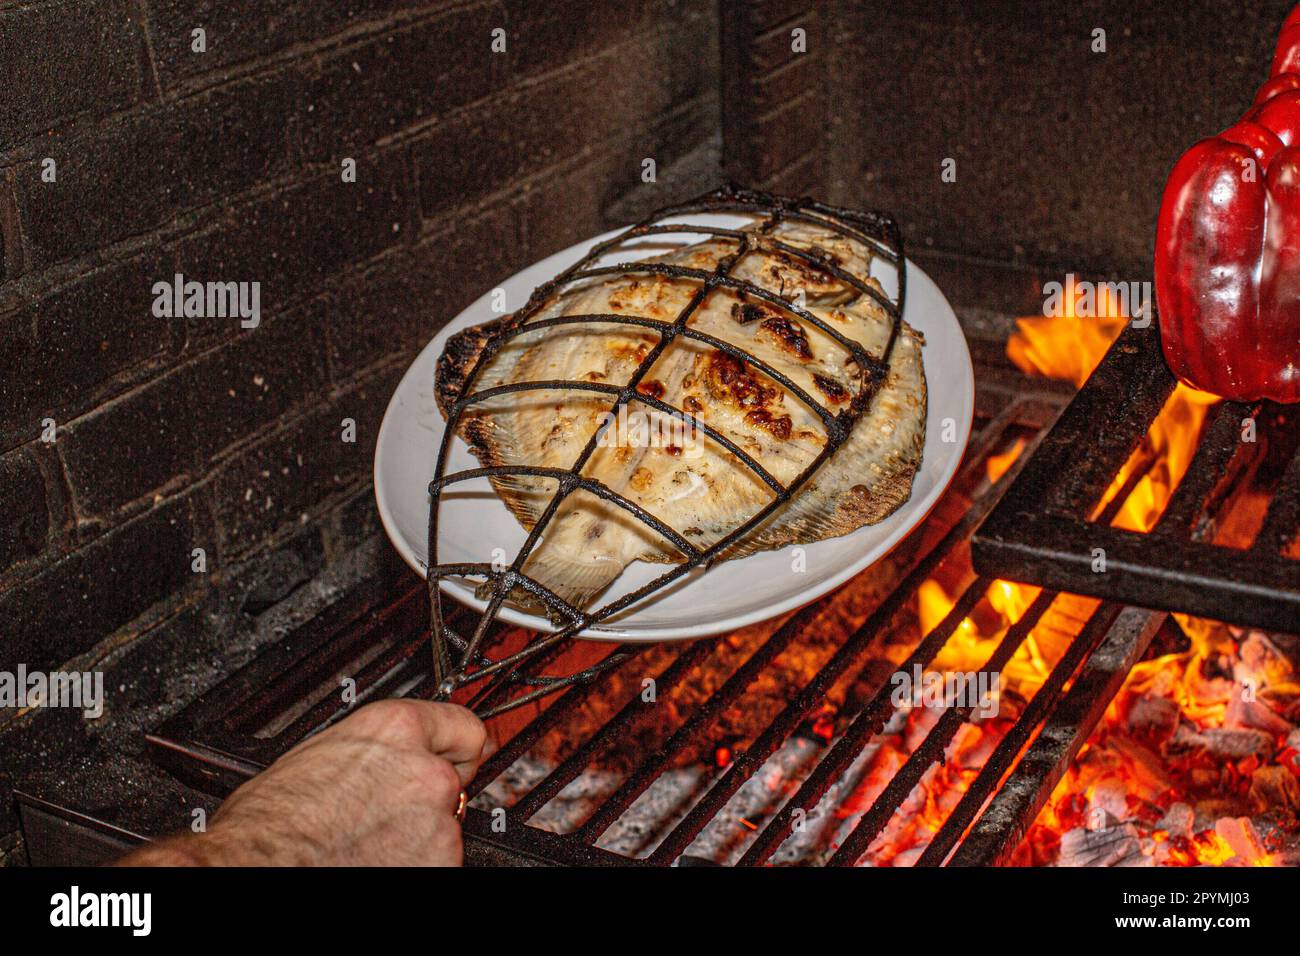 Cooking fish in iron cages over wood fire at Brat Restaurant in London, UK Stock Photo